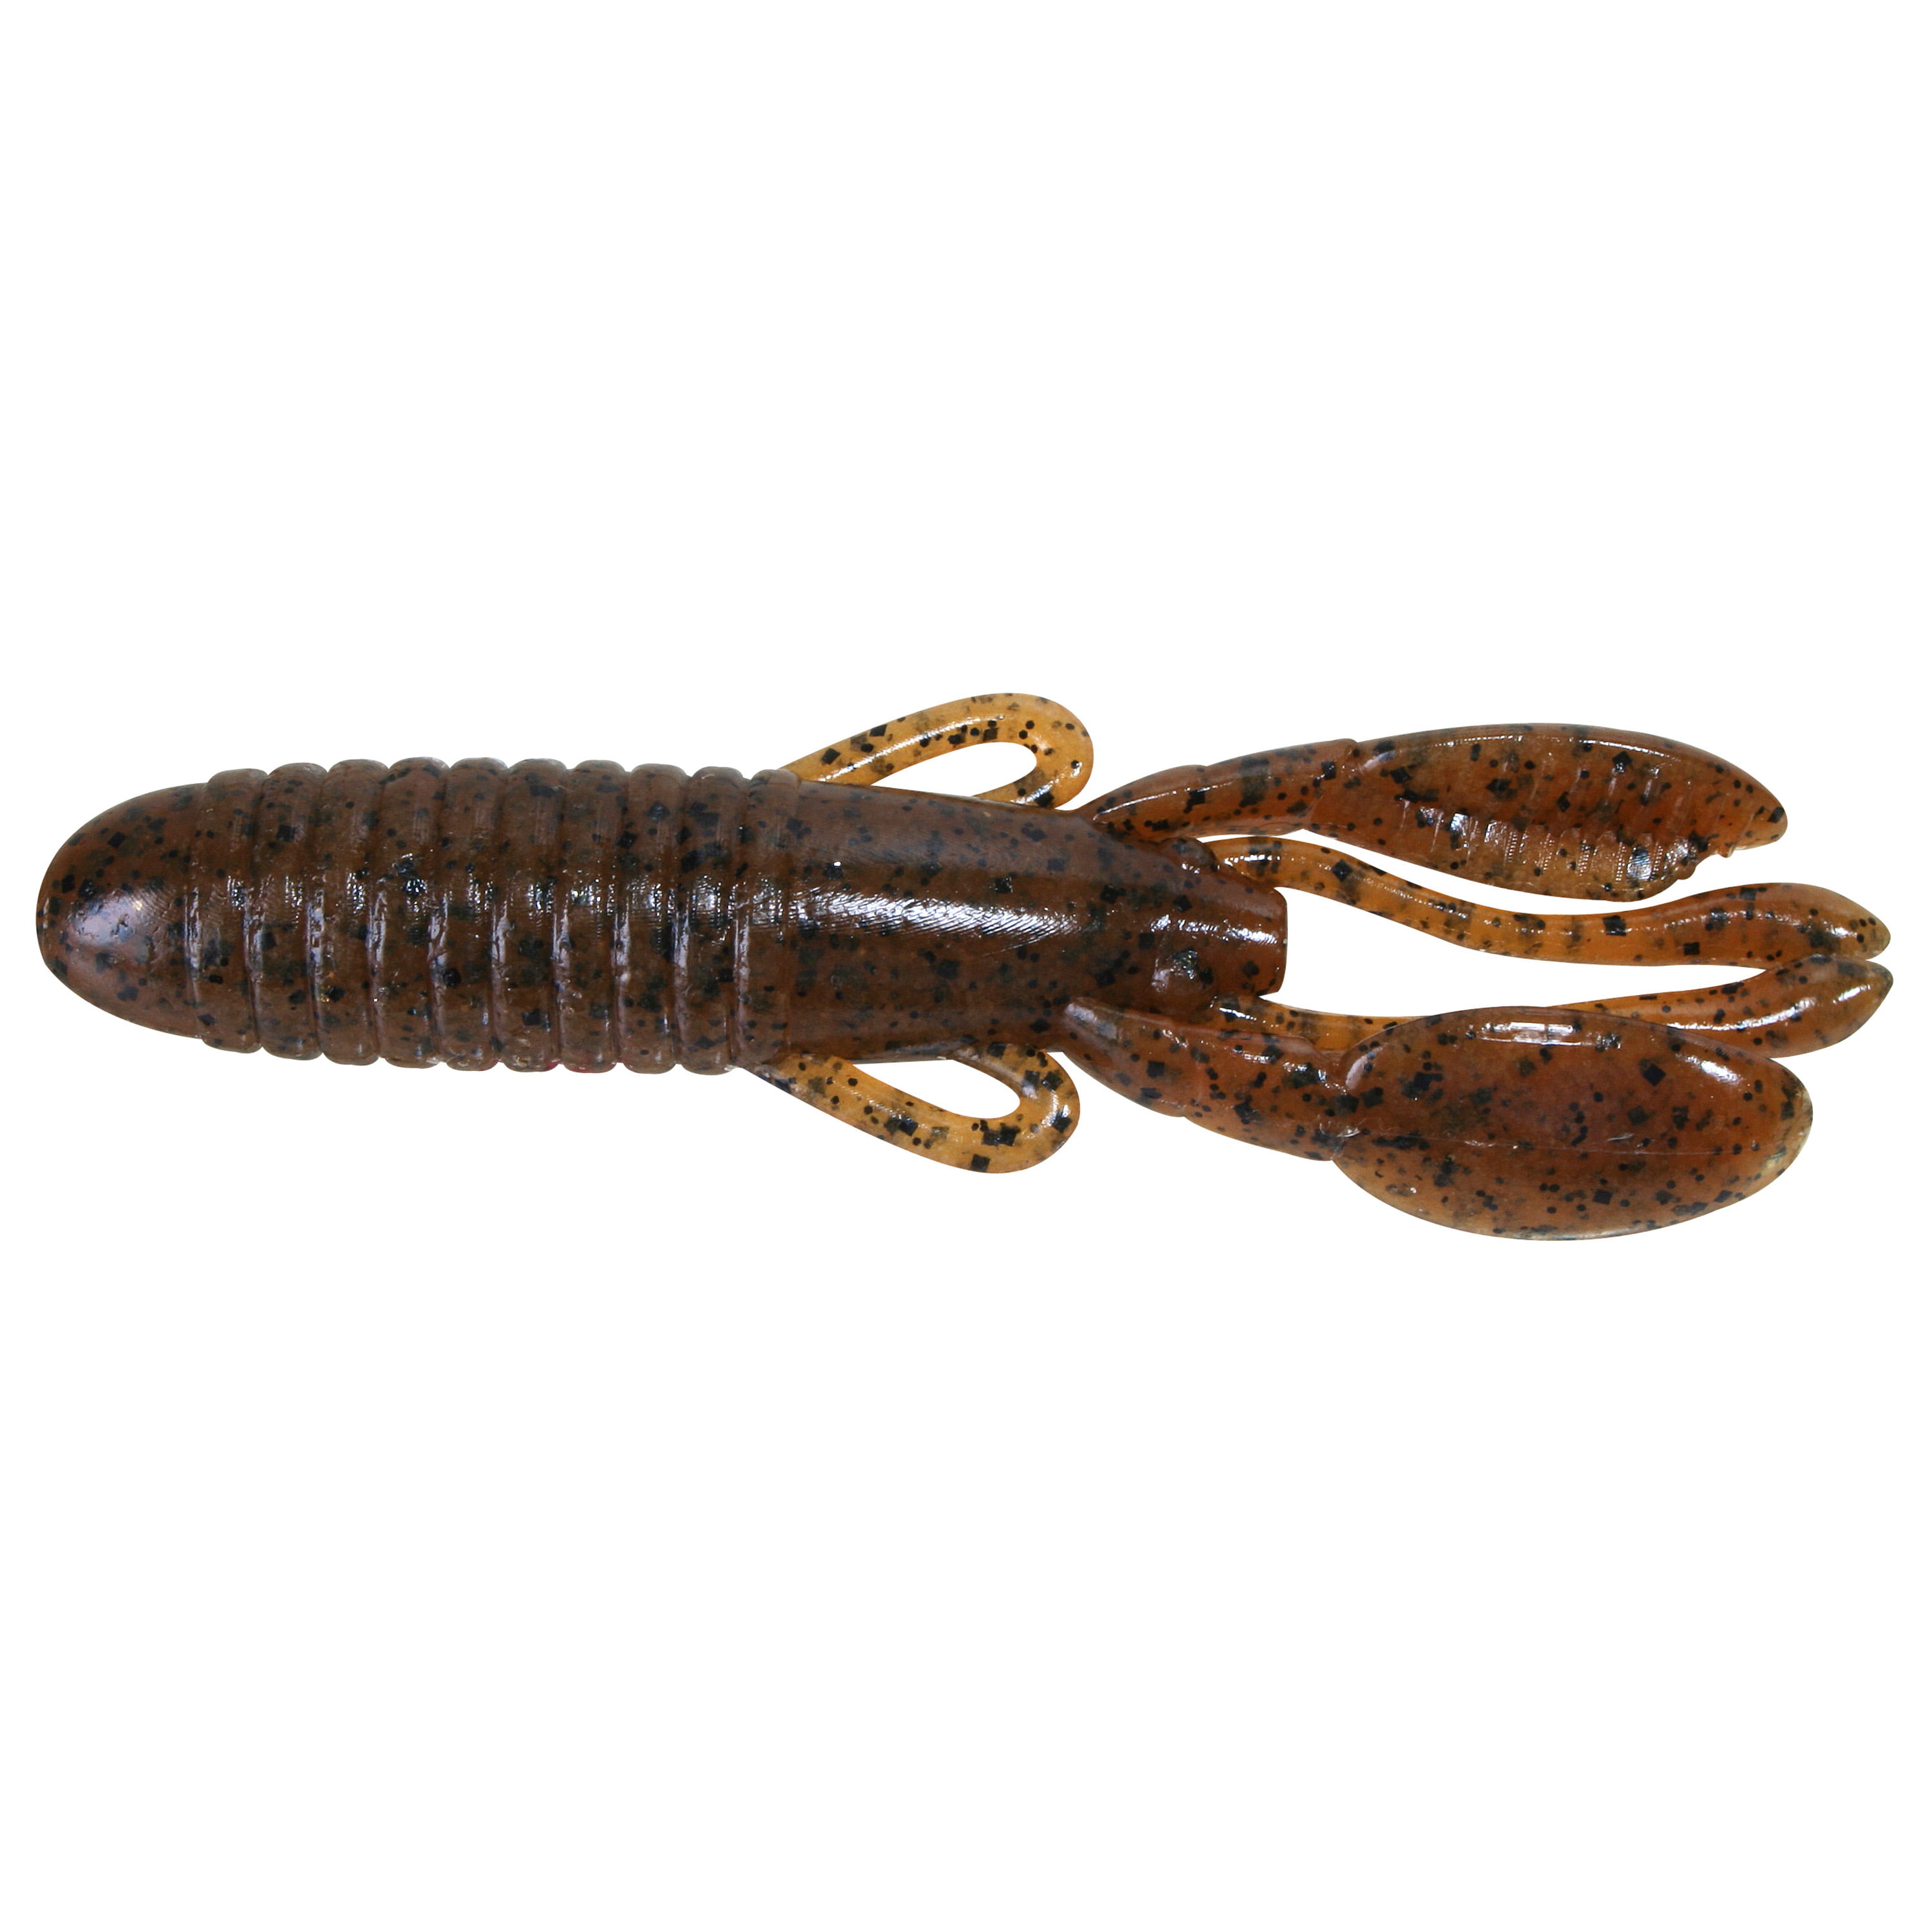 Jackall Lures Cover Craw Soft Craw Bait Lure 3 Body Length